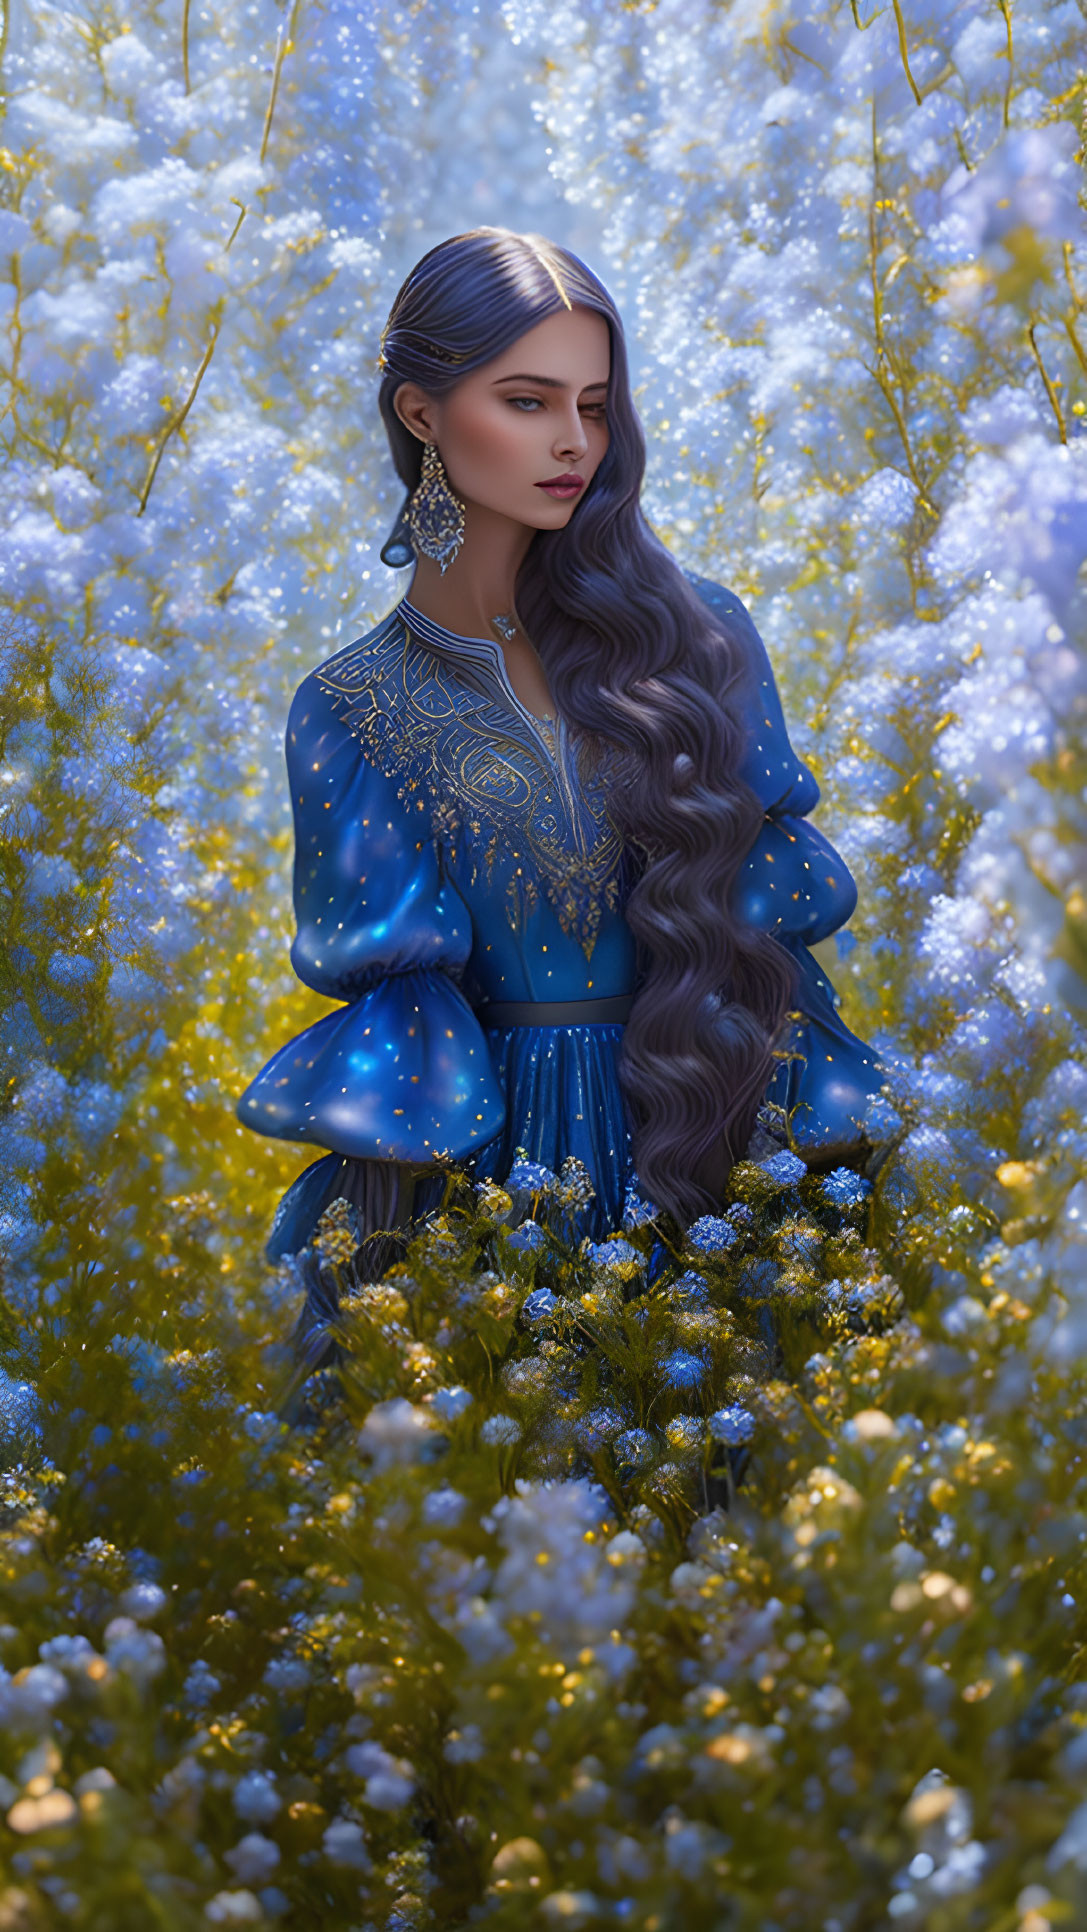 Ukrainian Princess surrounded by pearly blue rose 